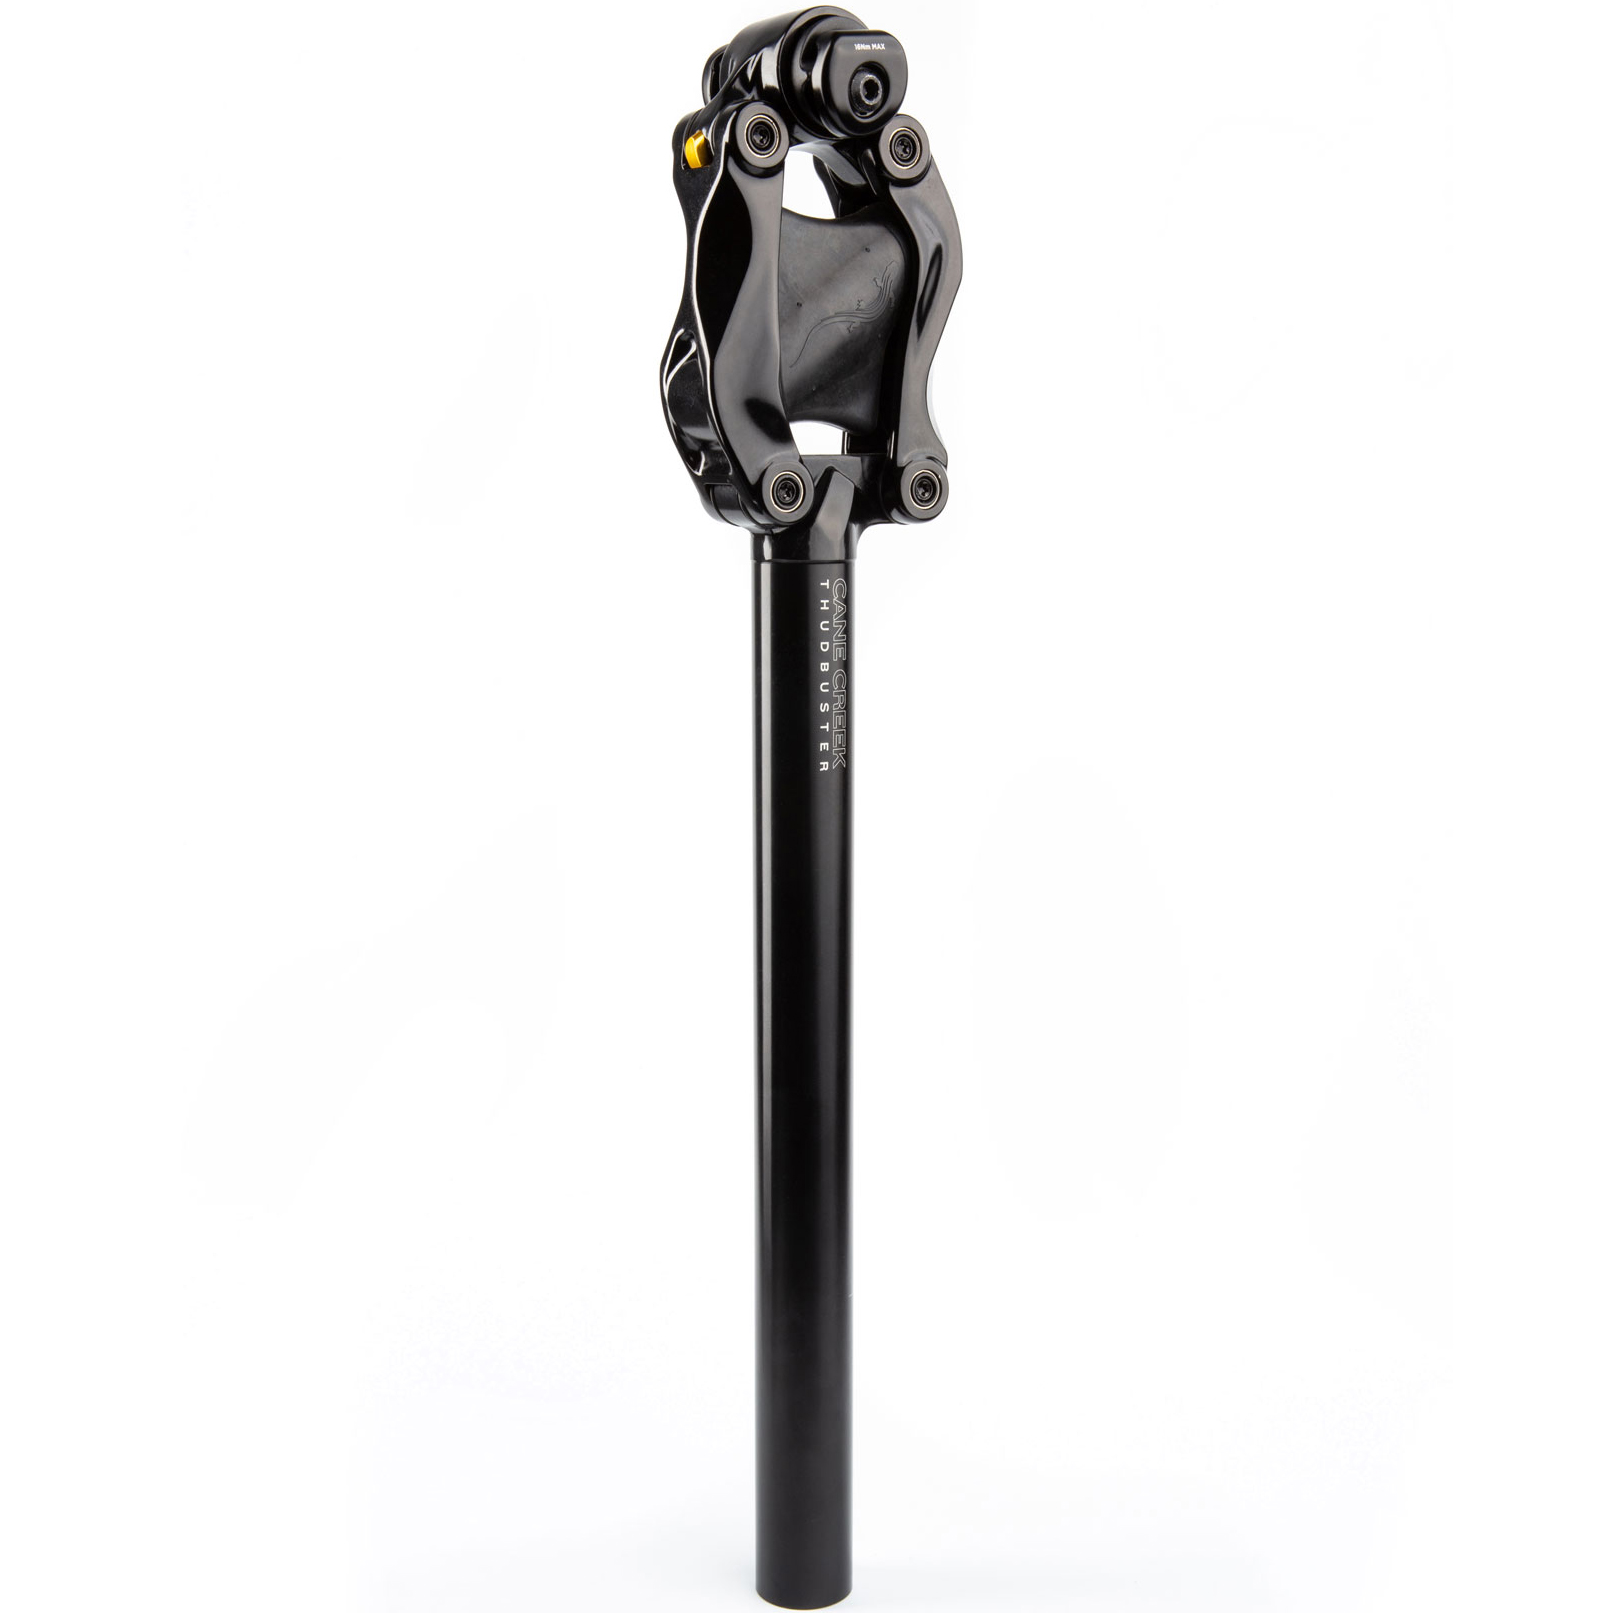 Image of Cane Creek Thudbuster G4 LT Seatpost - 420mm - Ø 31.6 mm